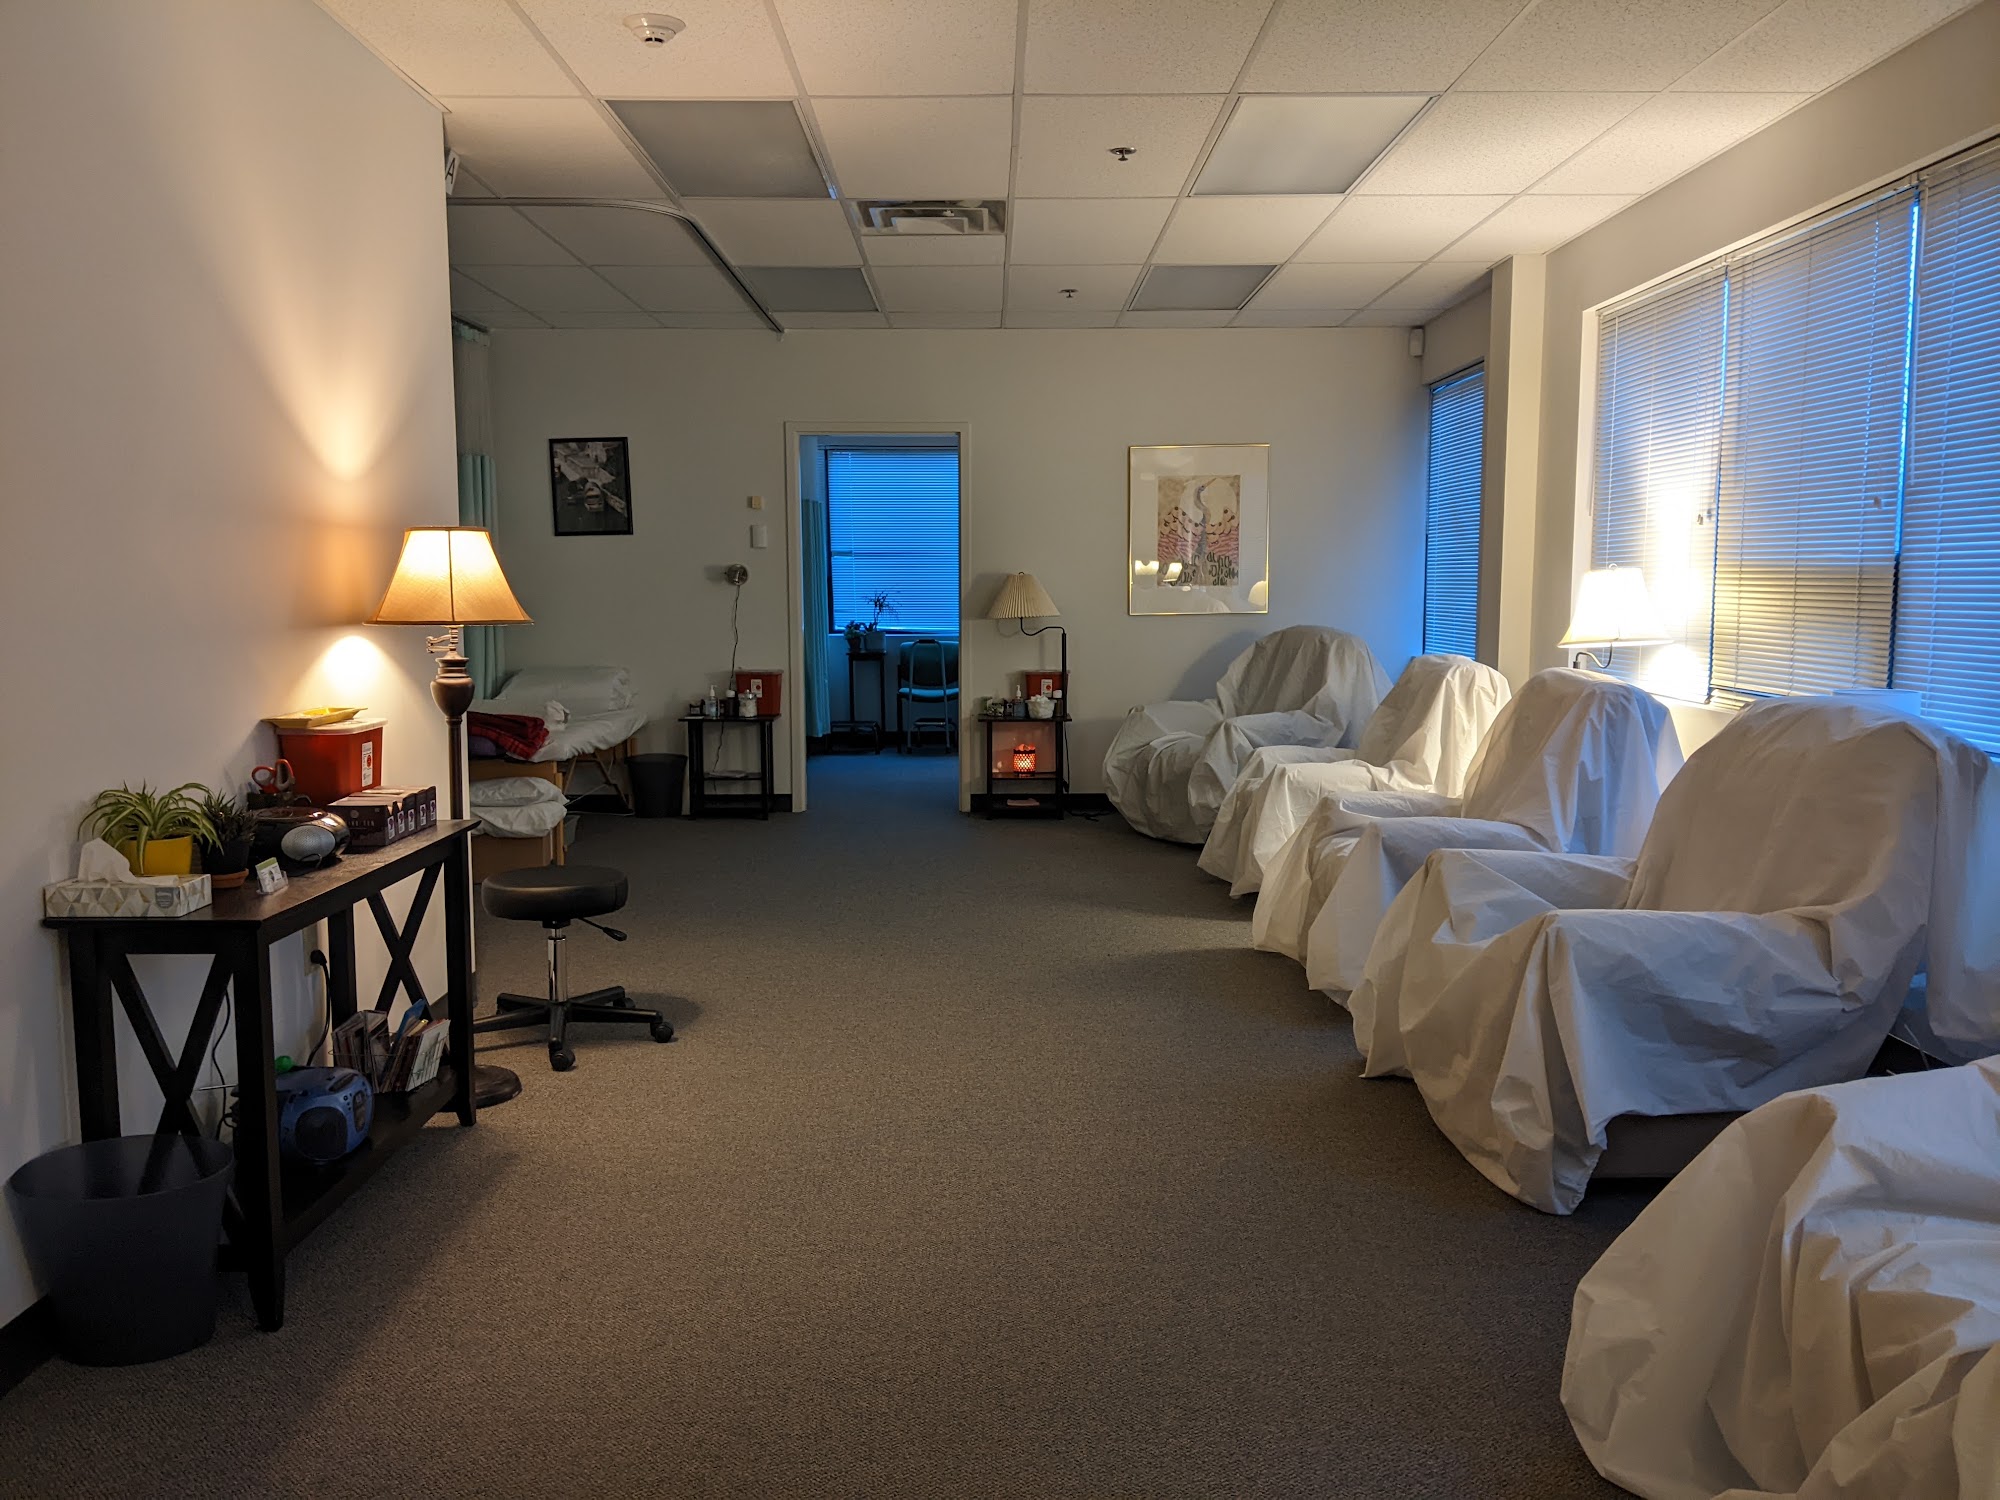 New England Community Acupuncture